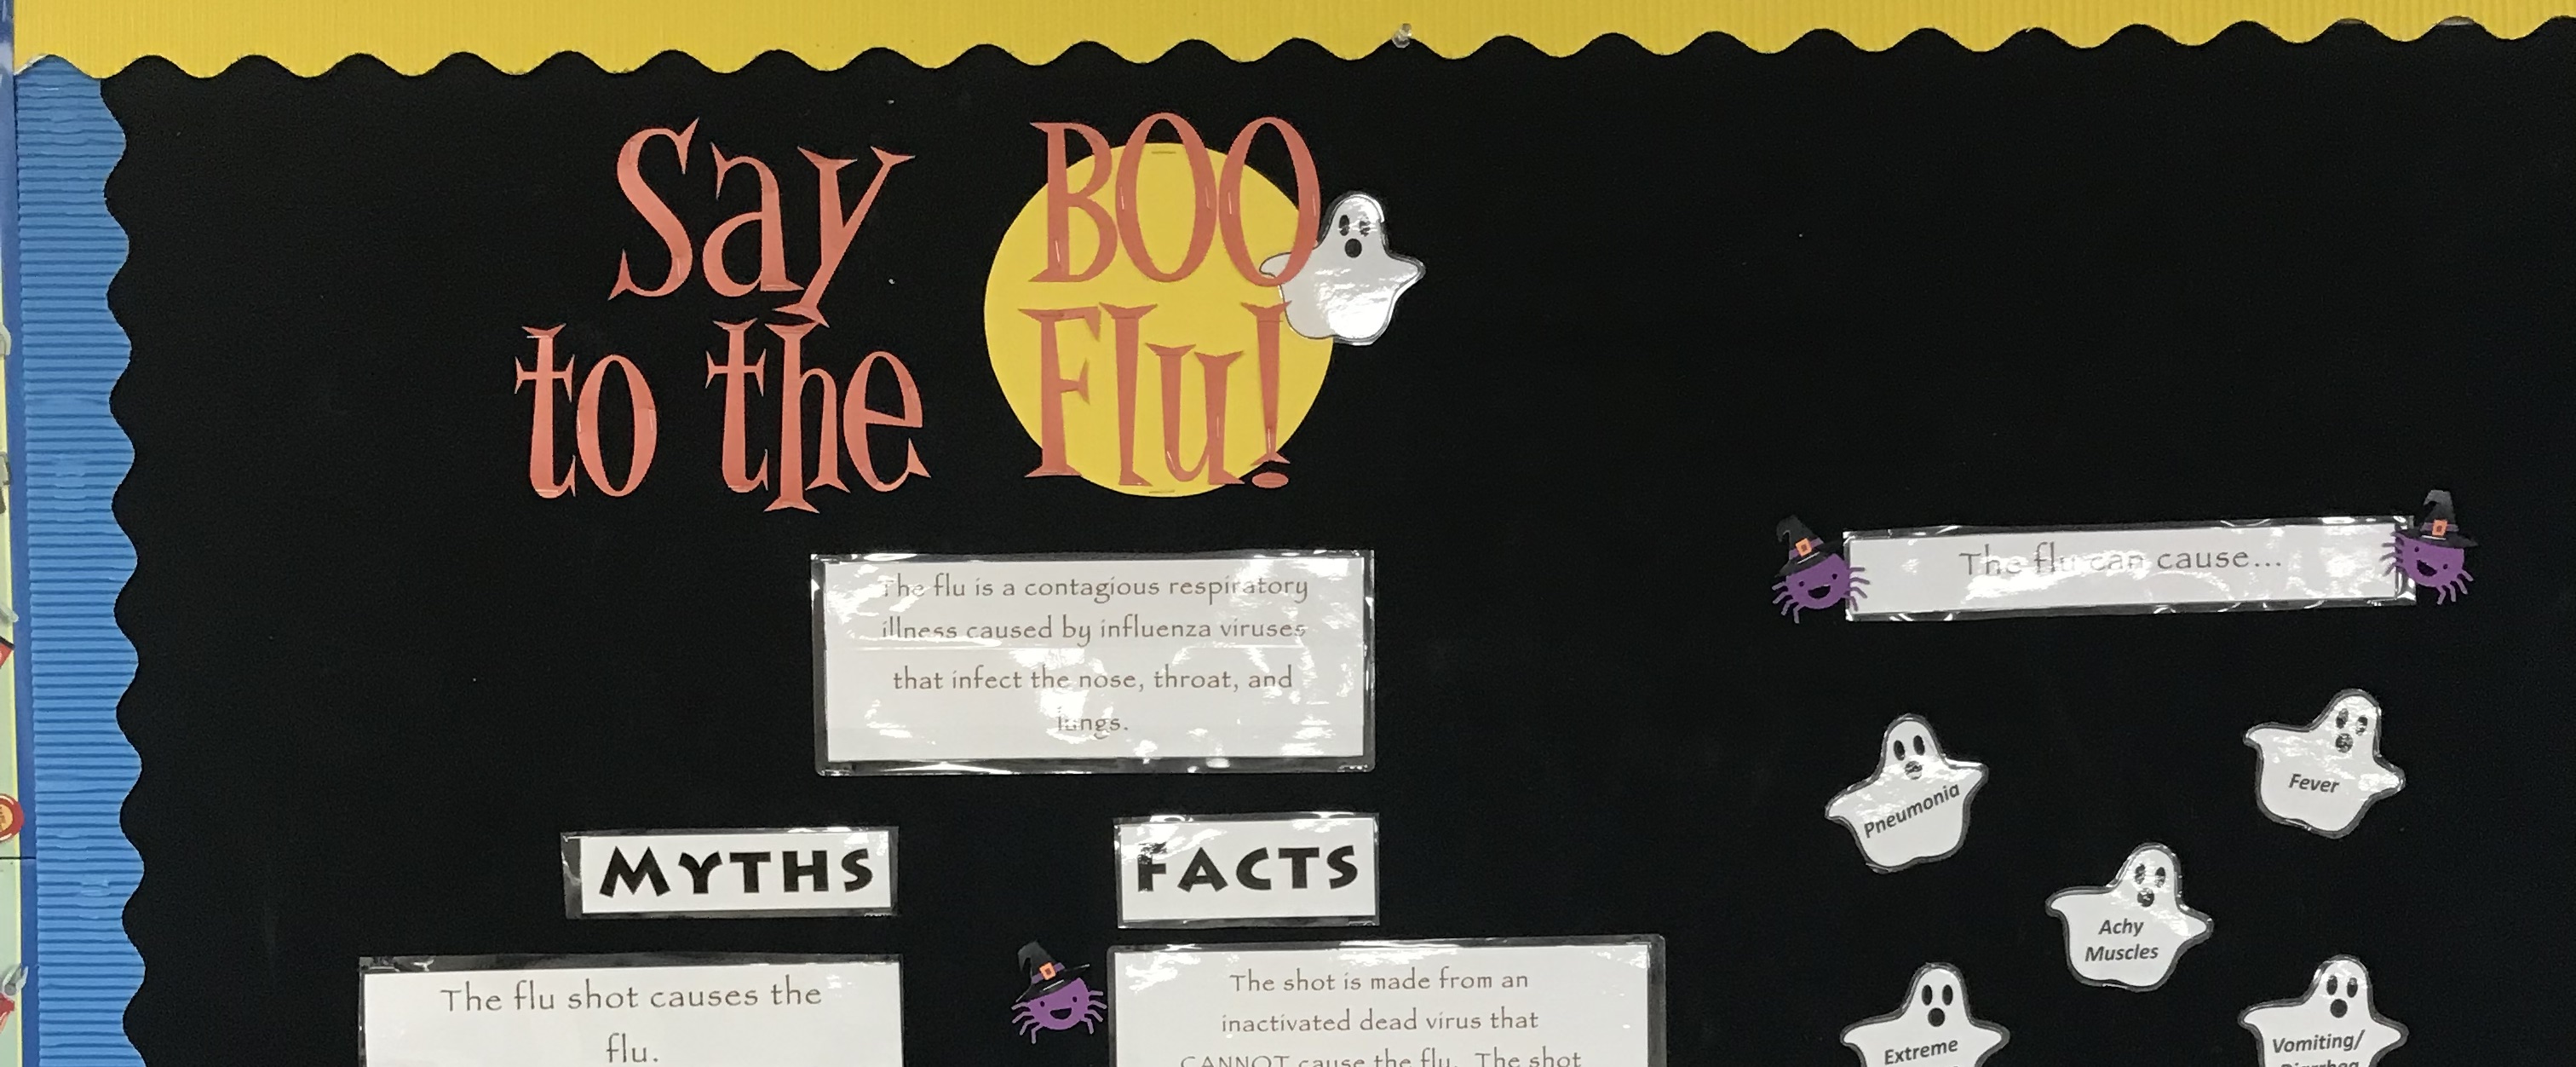 Student Health Center "Say BOO to the Flu" bulletin board in the MC Administration Building